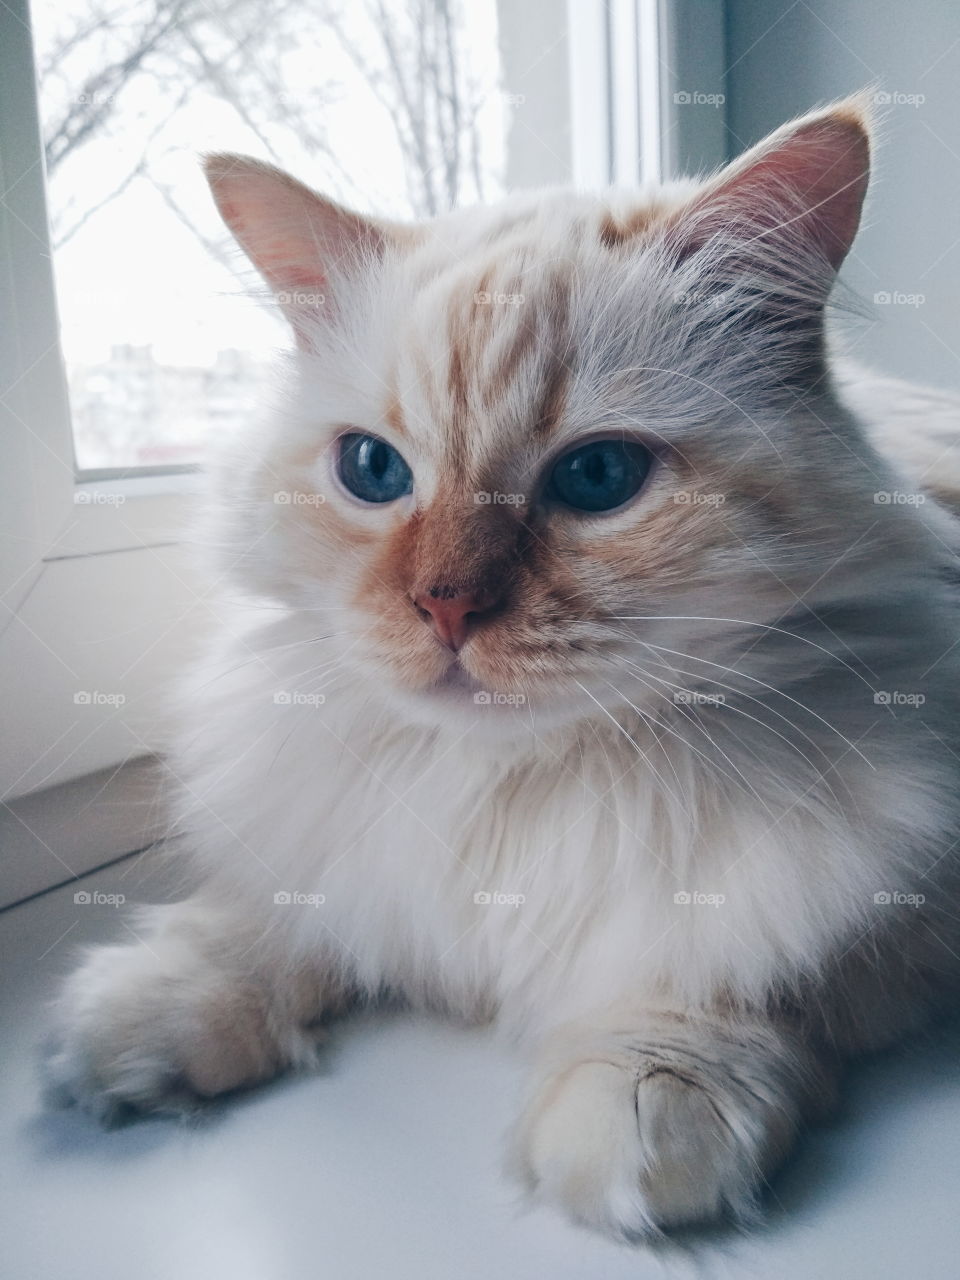 cat with big blue eyes